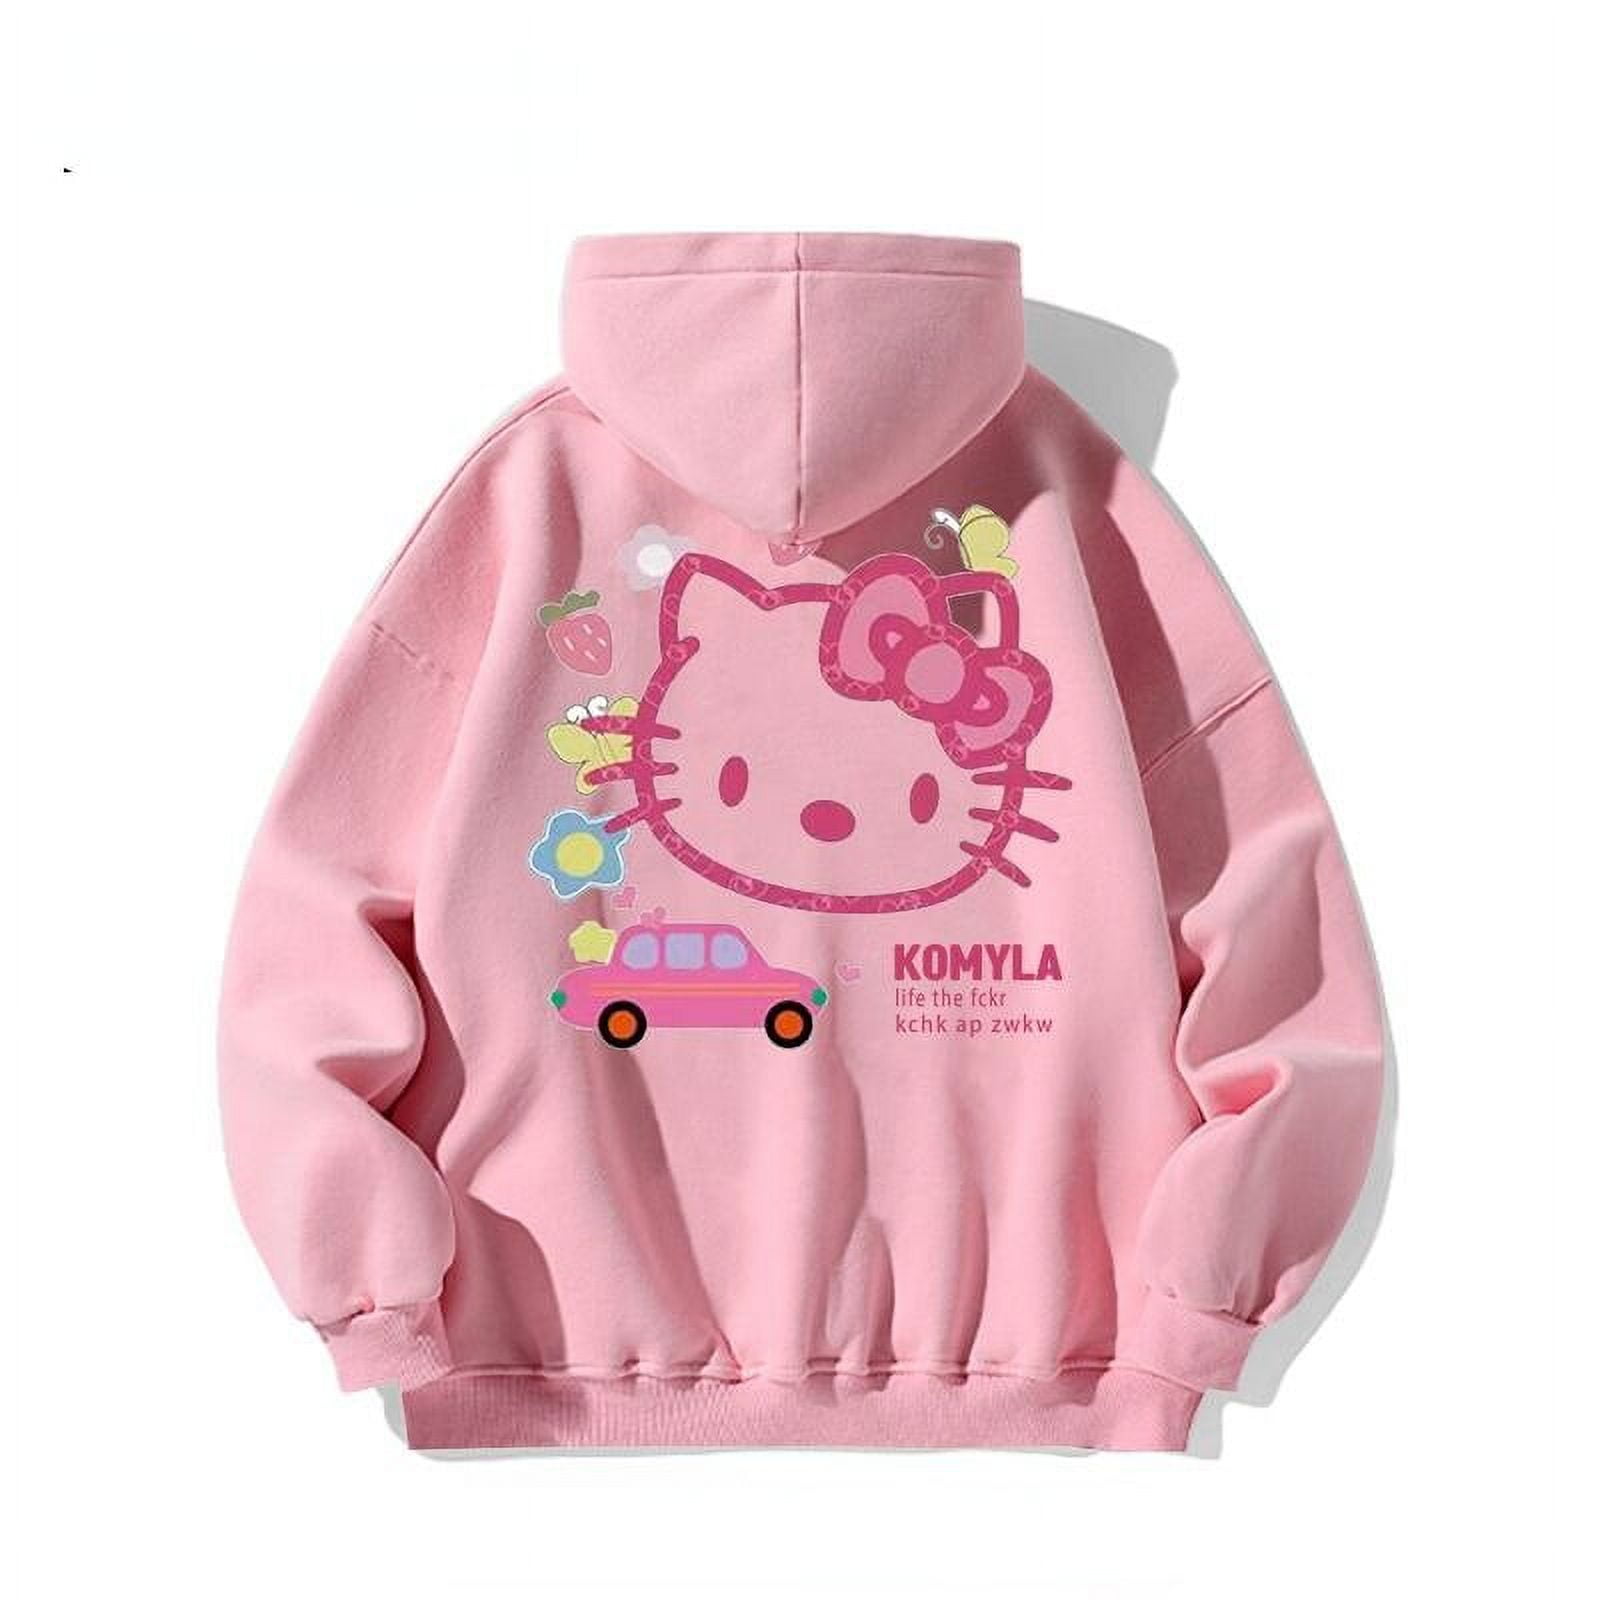 curtis leighton recommends Hello Kitty Adult Clothes